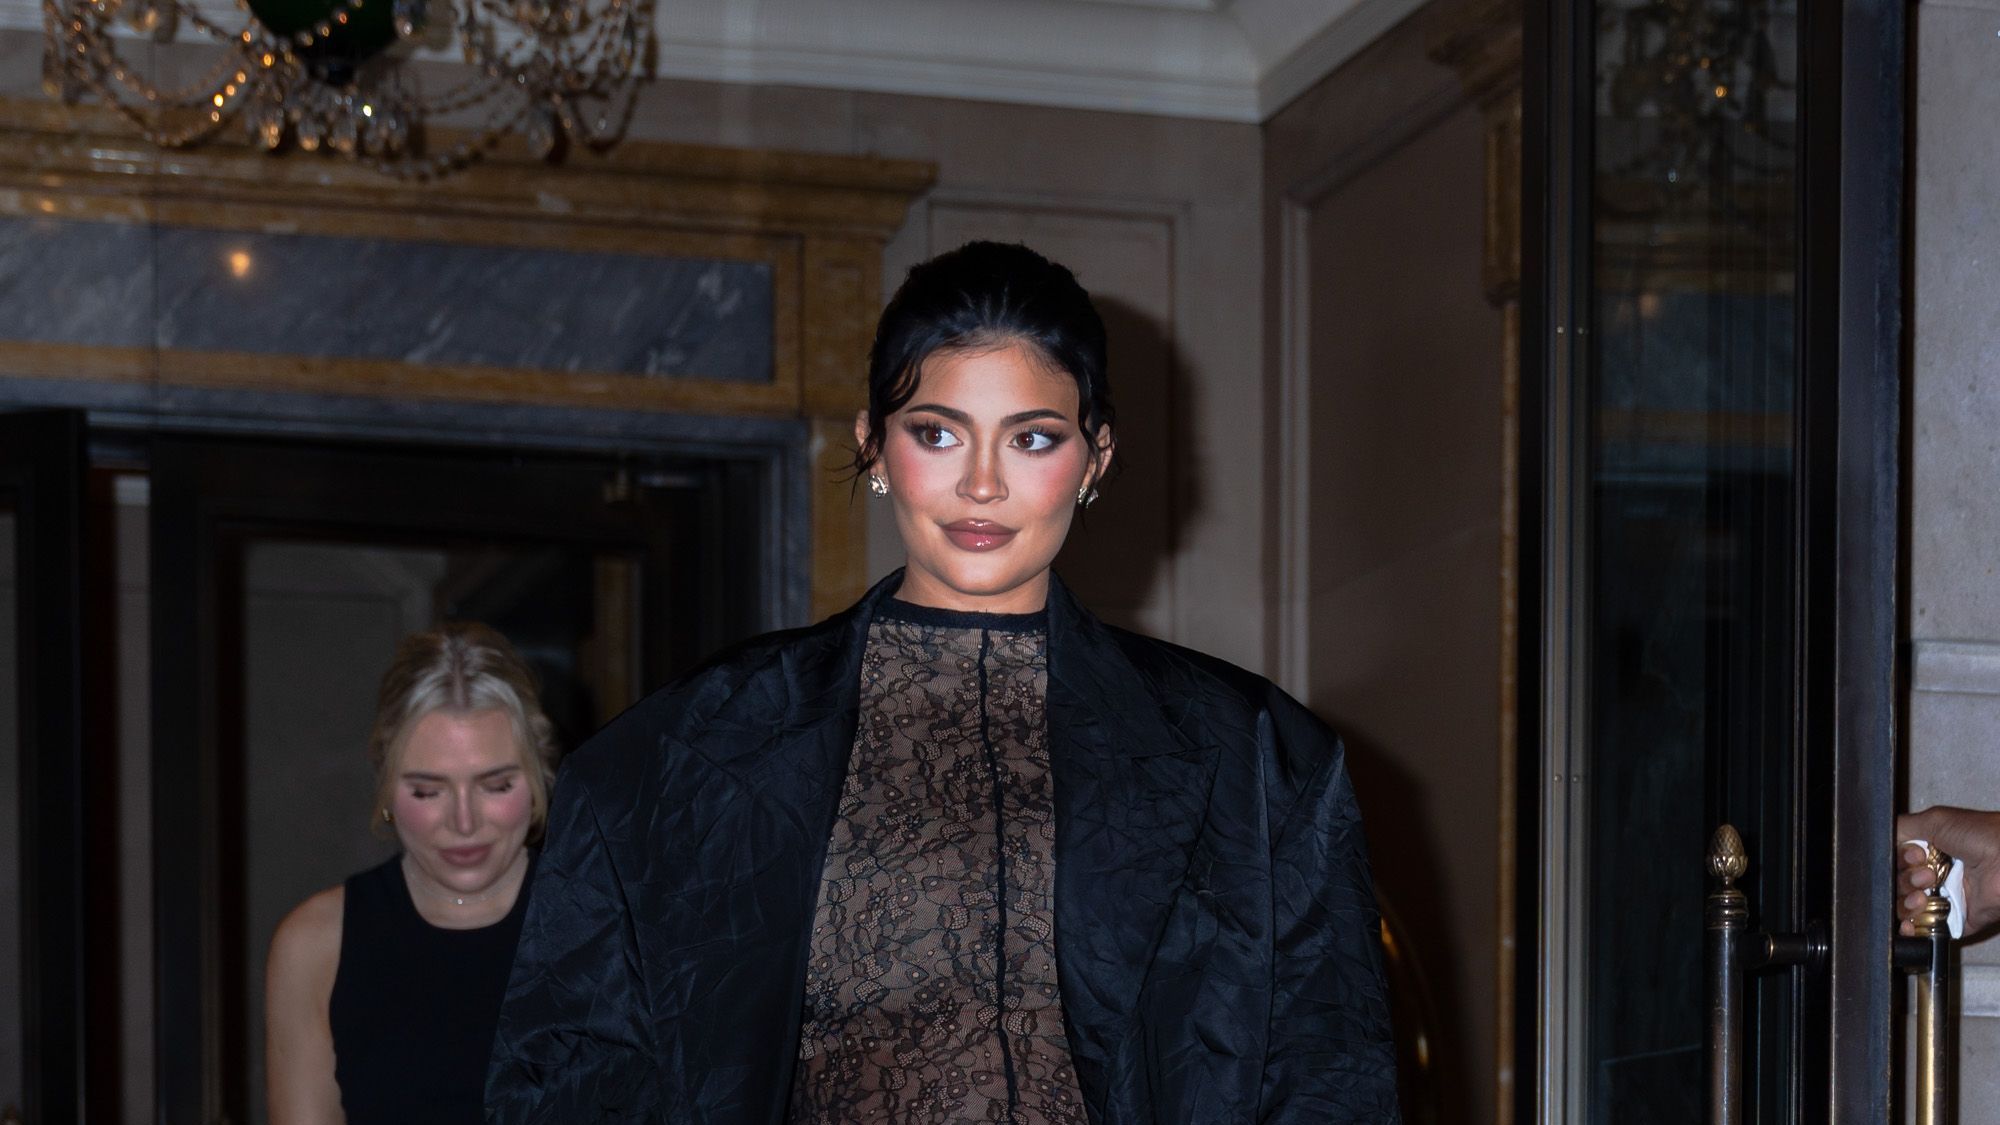 Kylie Jenner's Street Style is All Curves [PHOTOS] – Footwear News